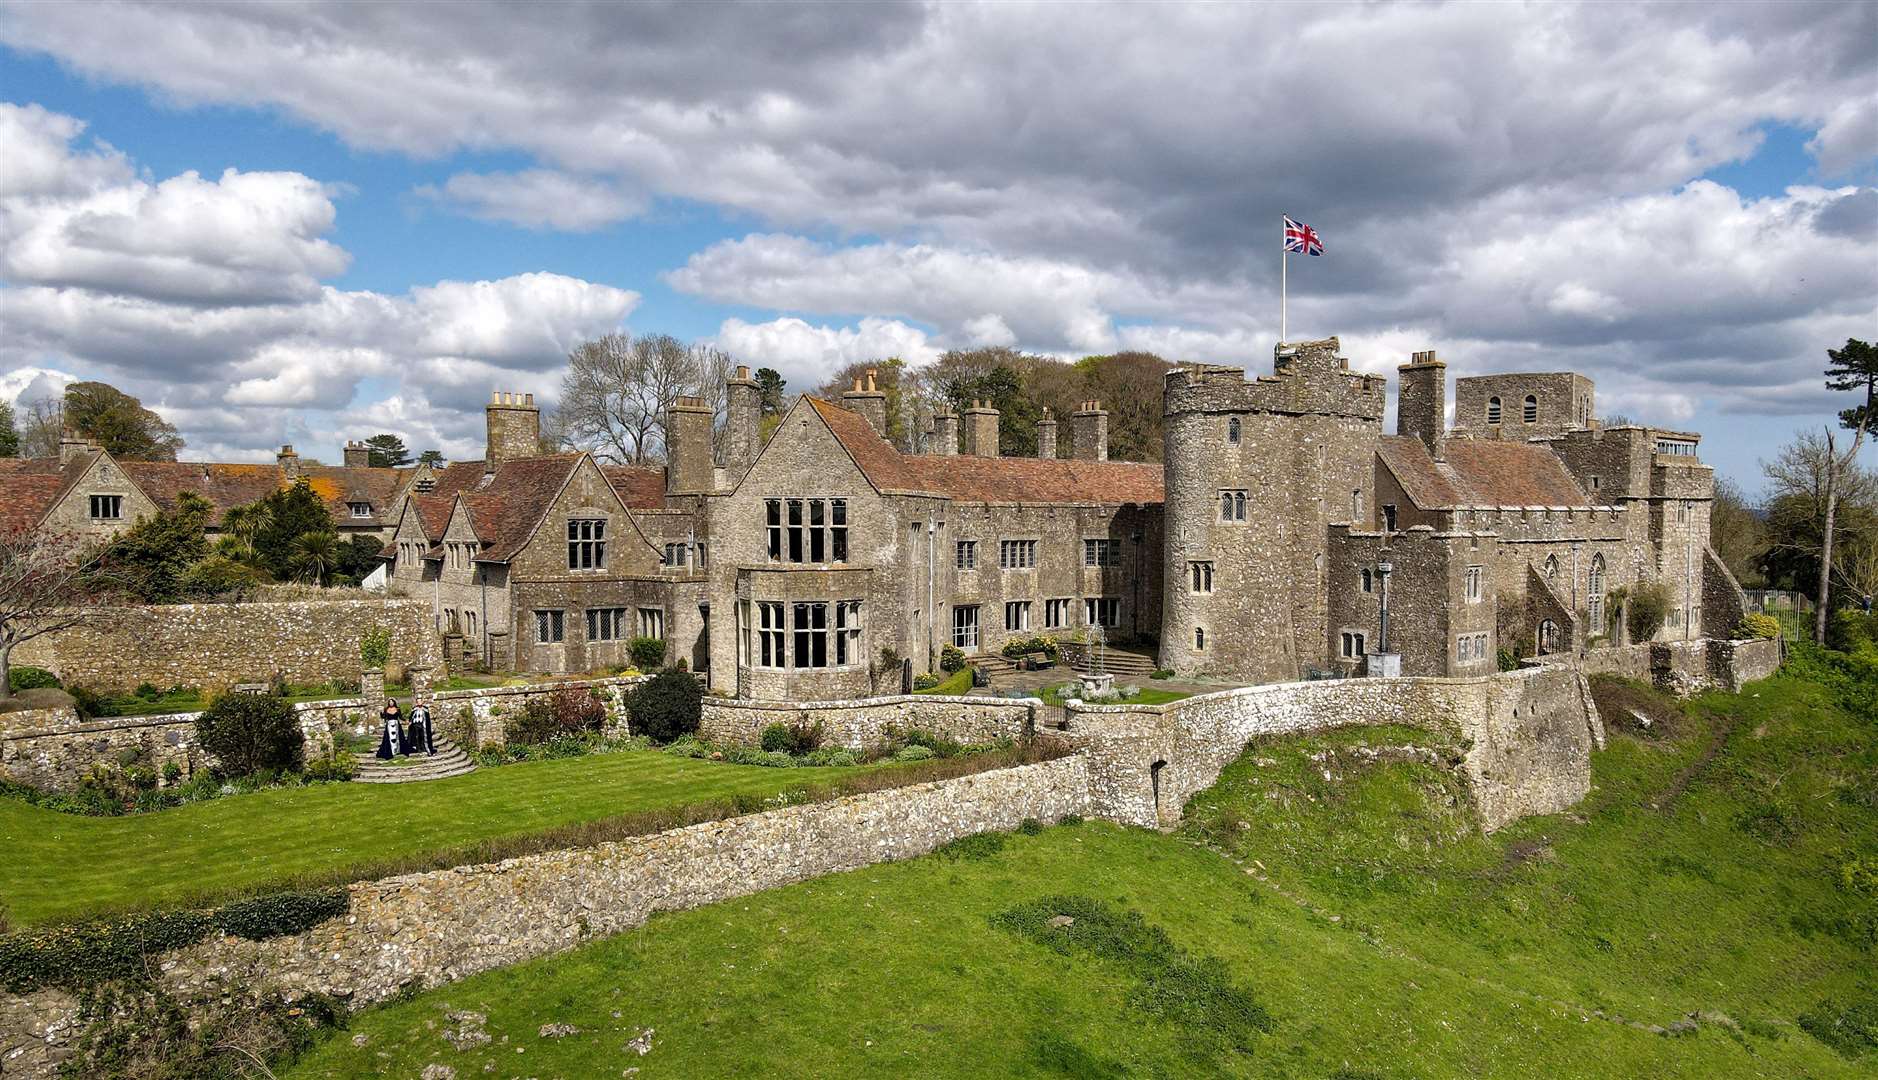 Lympne Castle went on the market originally for £15m...and sold for £5.5m